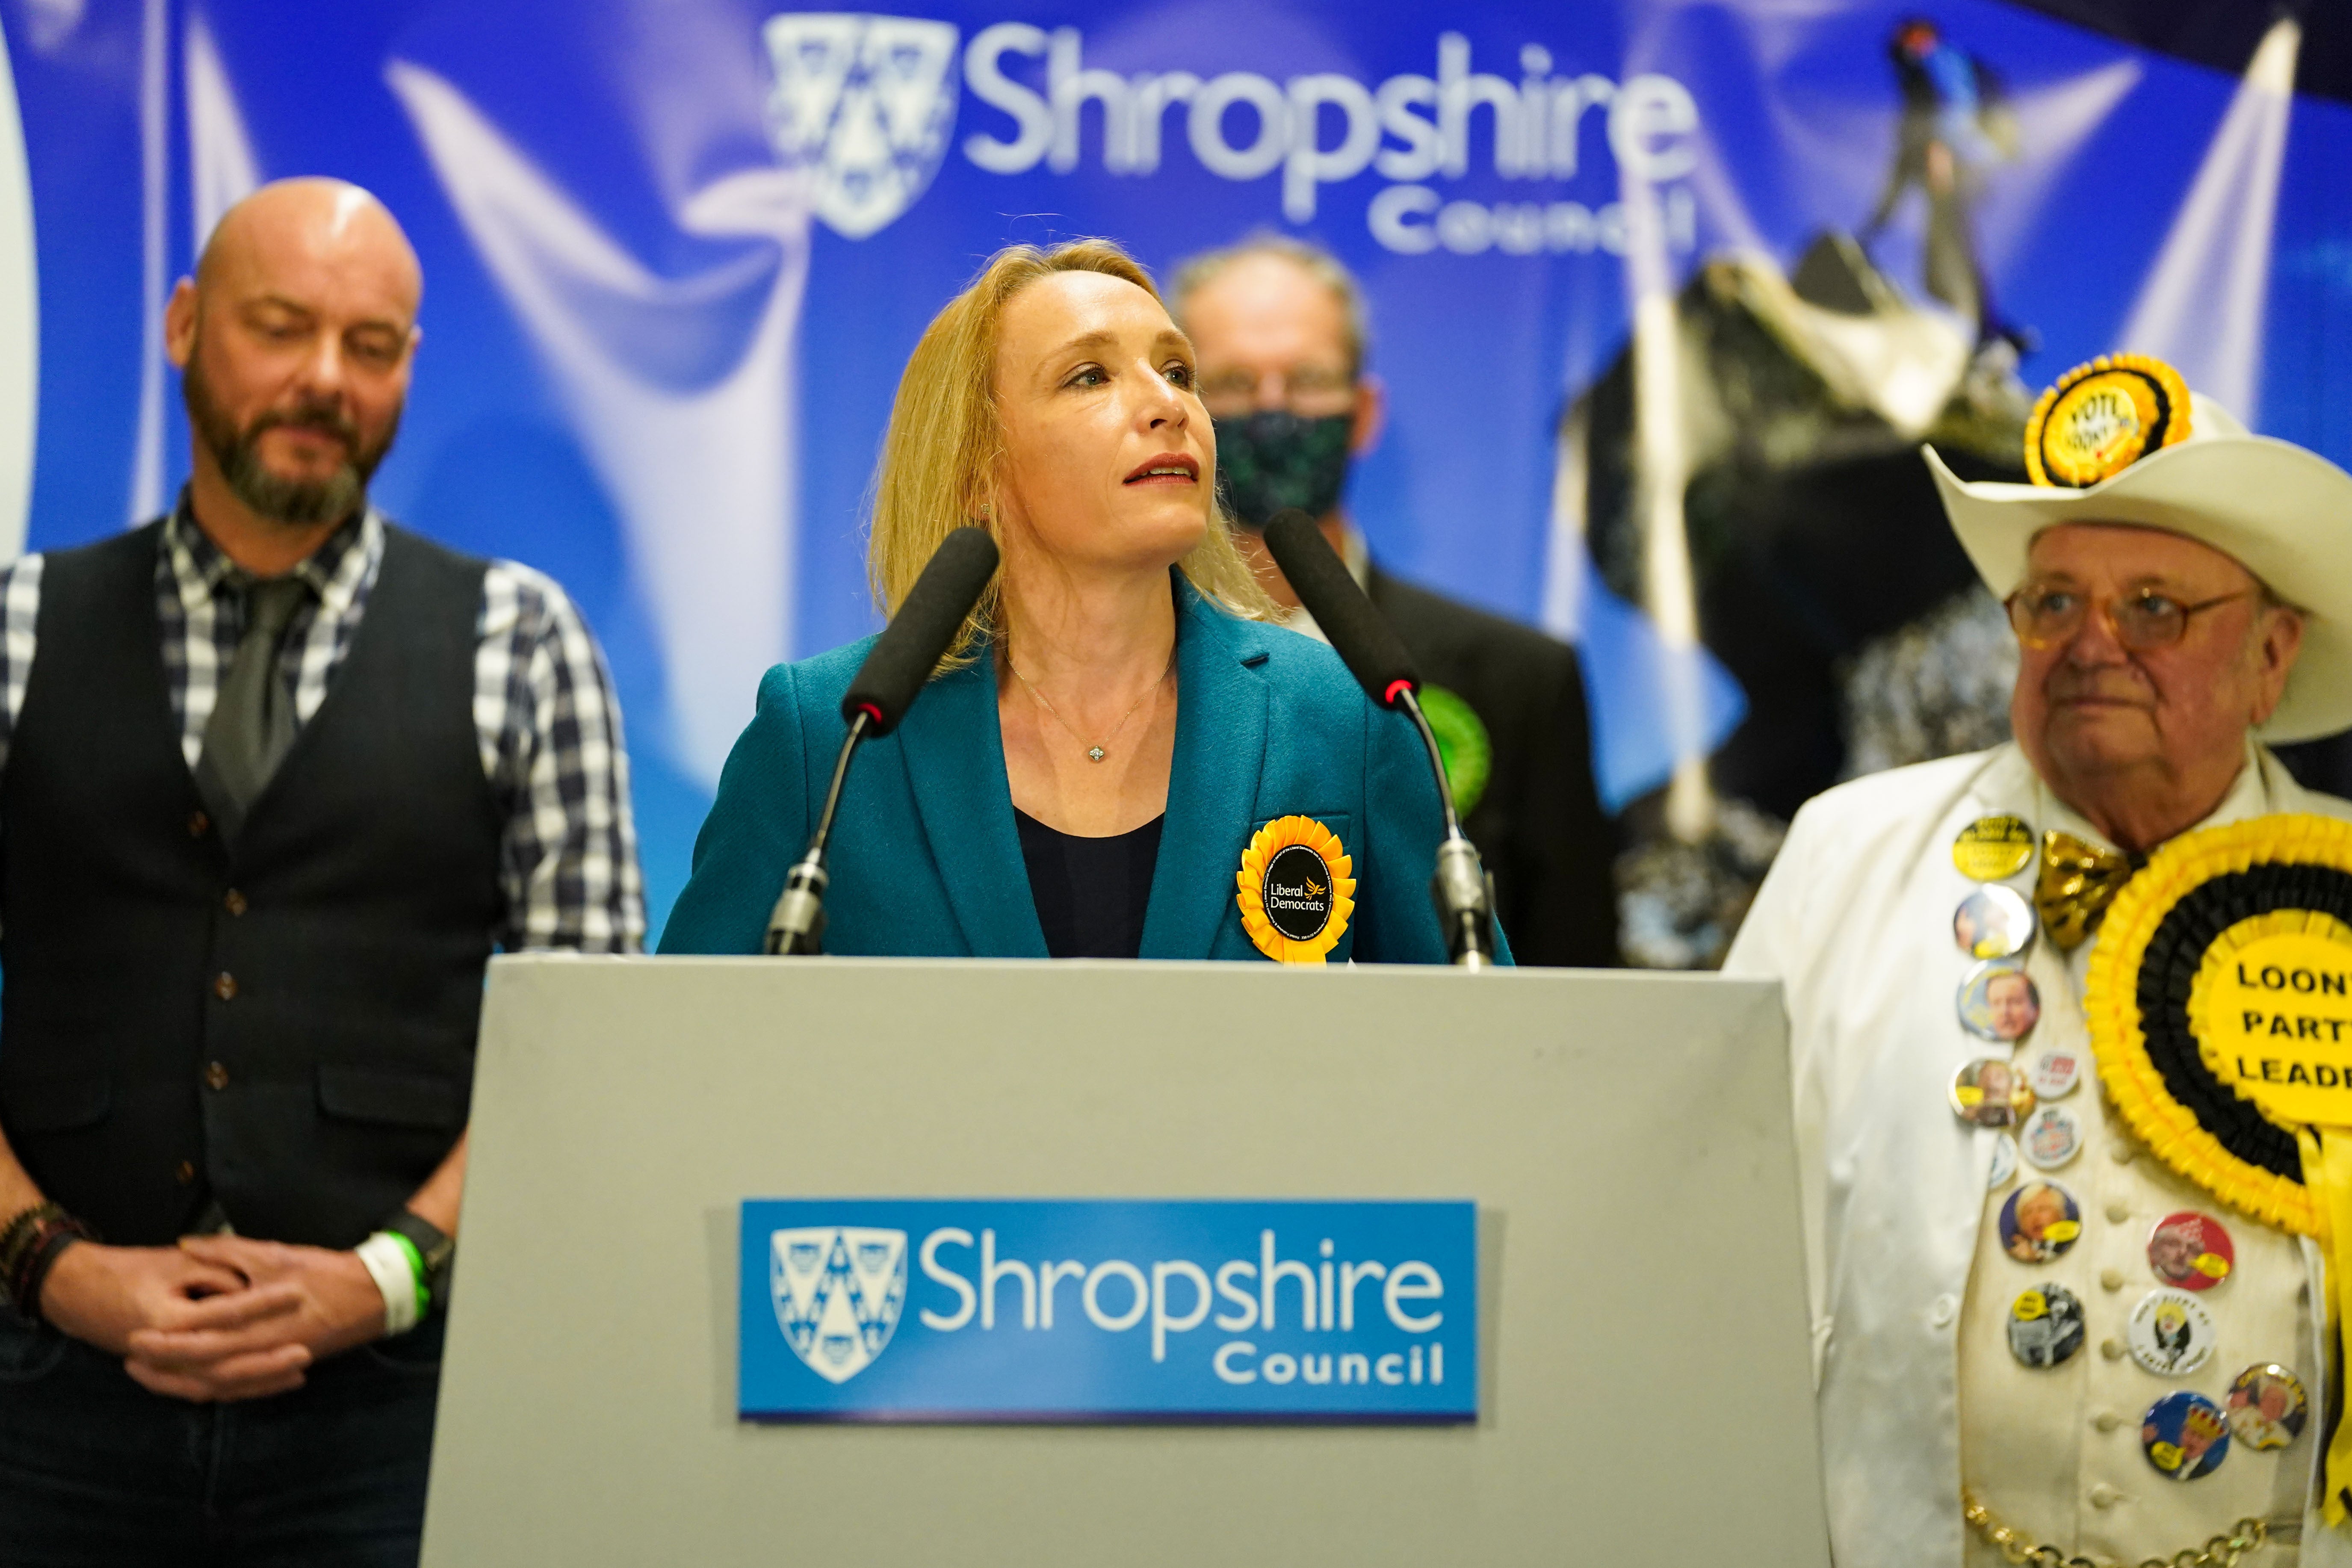 Lib Dem candidate Helen Morgan delivers a victory speech after the result is declared in the North Shropshire by-election